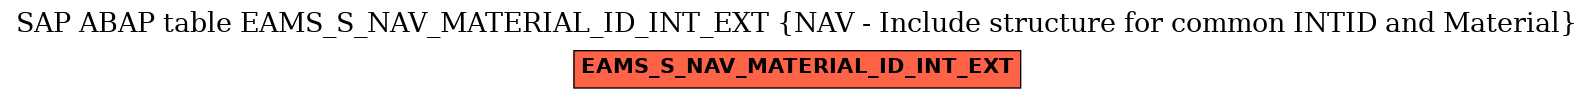 E-R Diagram for table EAMS_S_NAV_MATERIAL_ID_INT_EXT (NAV - Include structure for common INTID and Material)